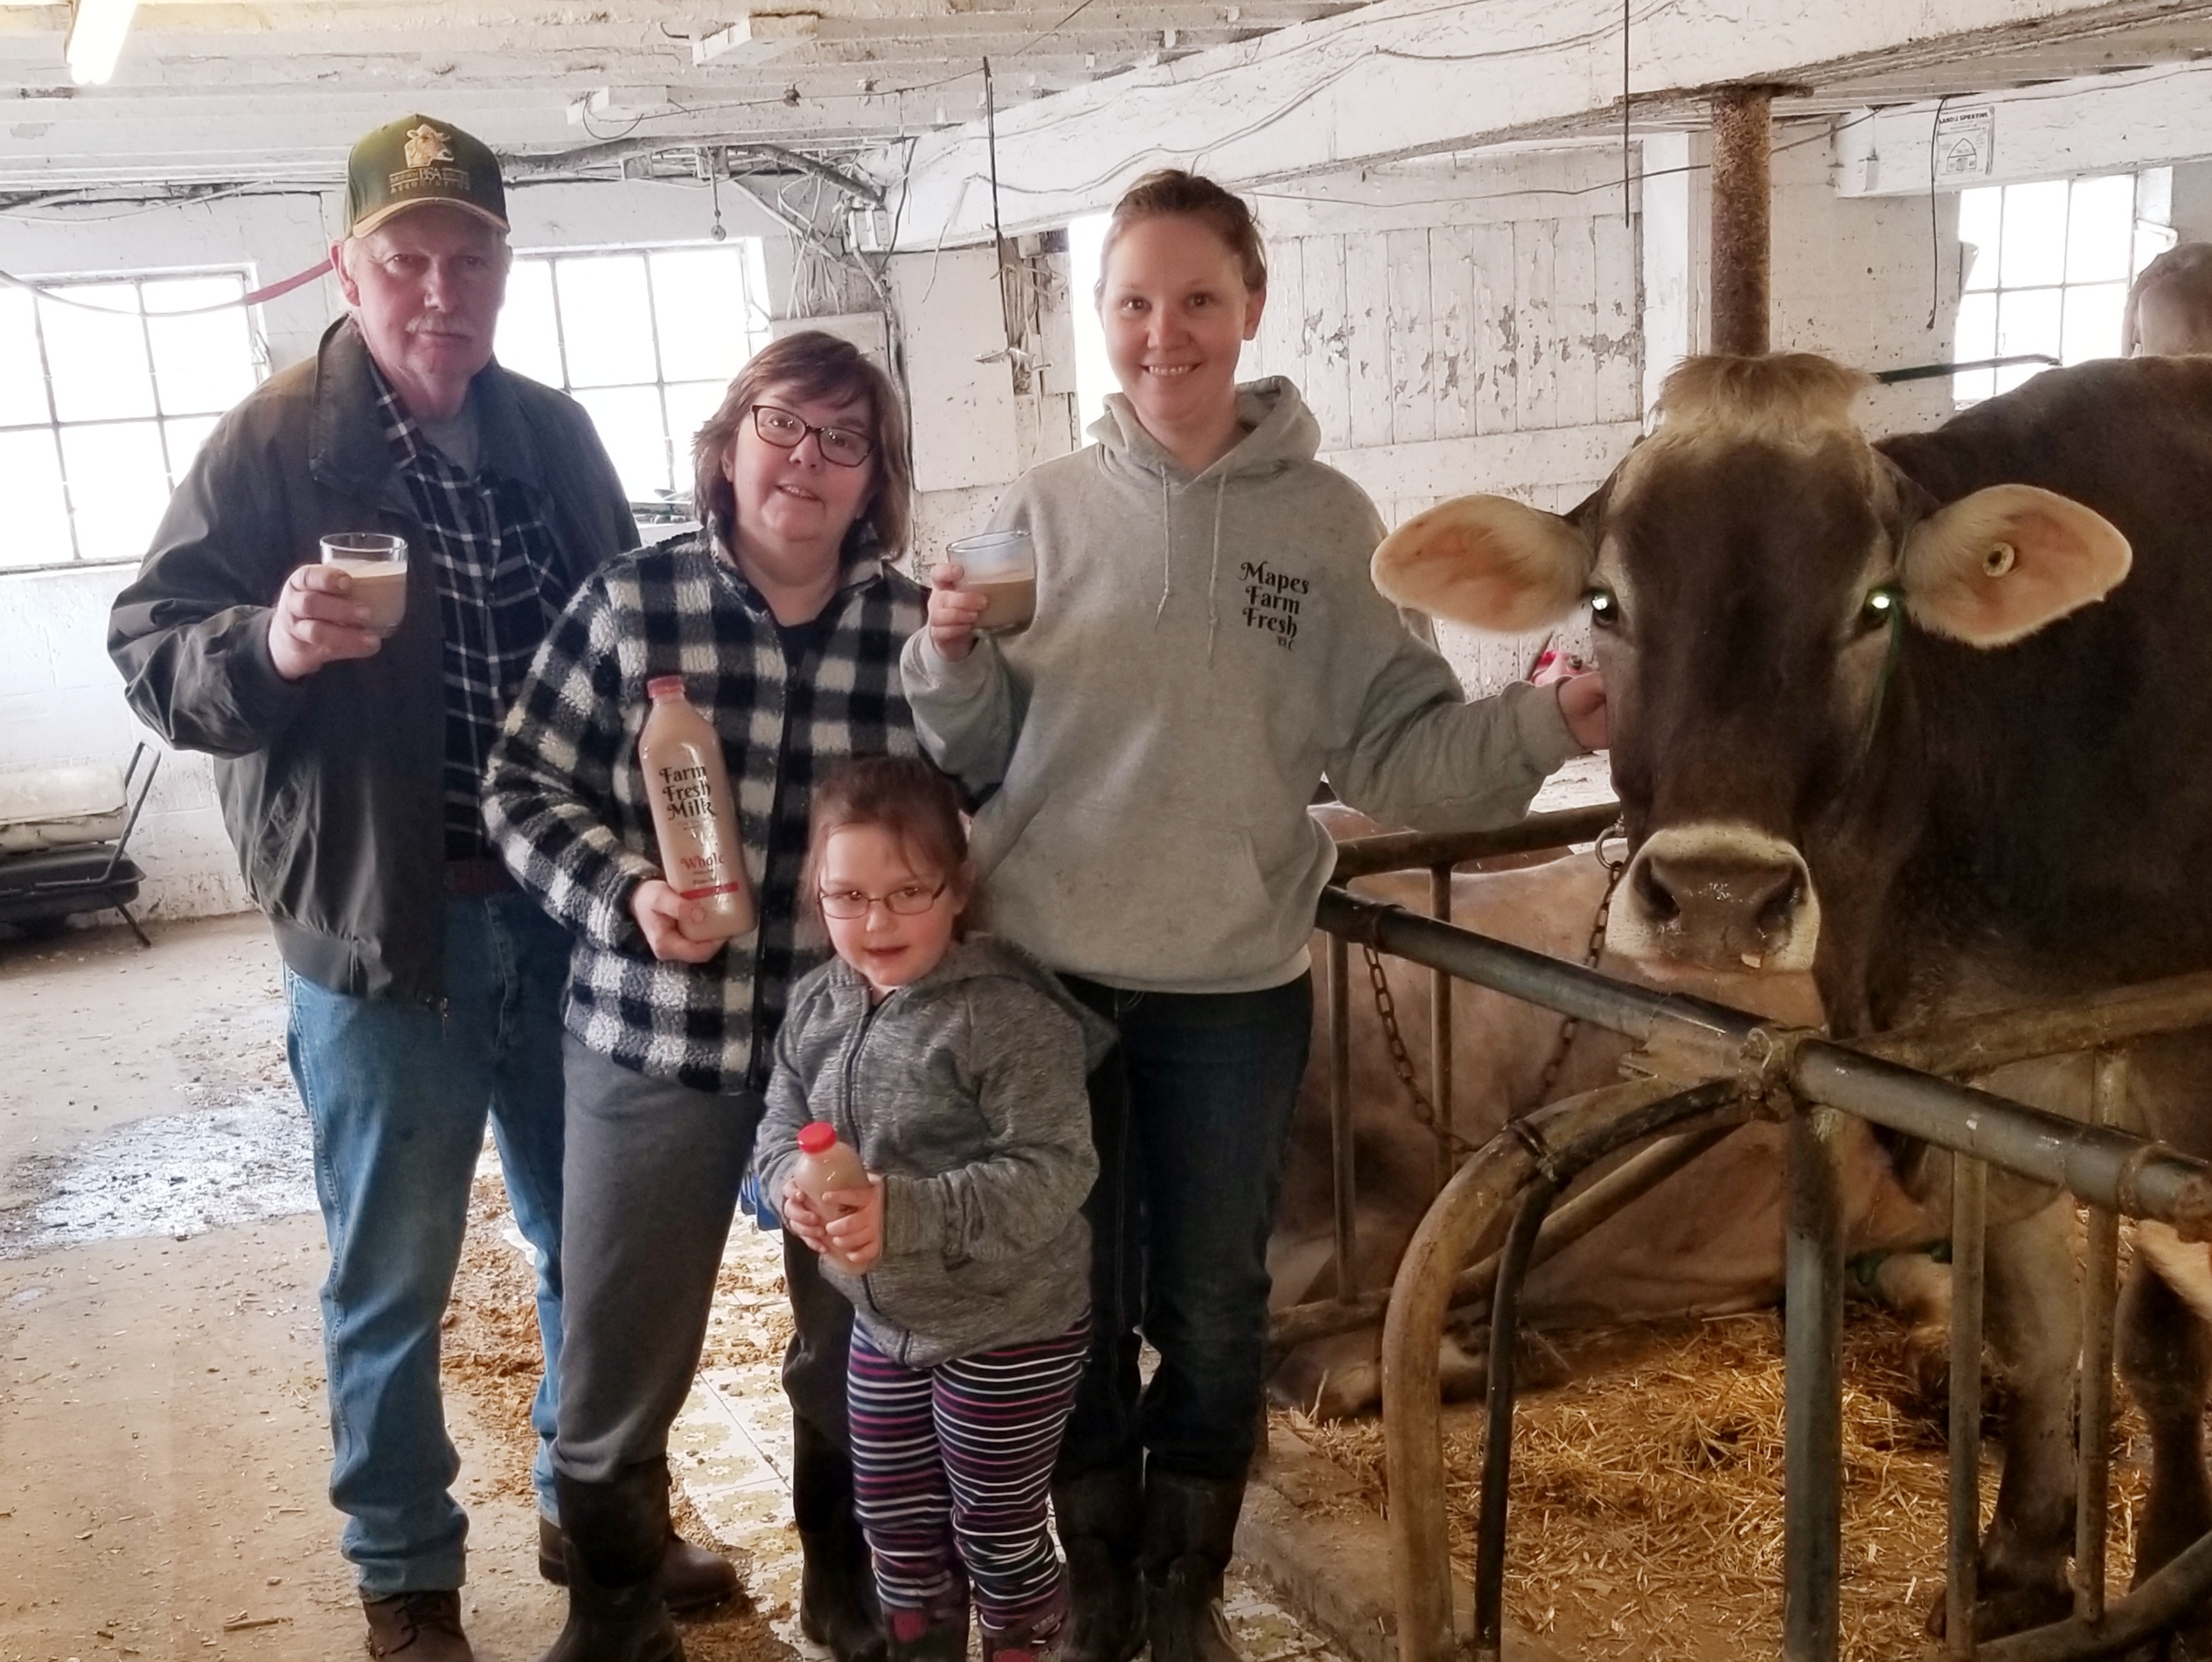 Several members of a dairy family hold bottles of milk or glasses of chocolate milk while standing next to a cow.